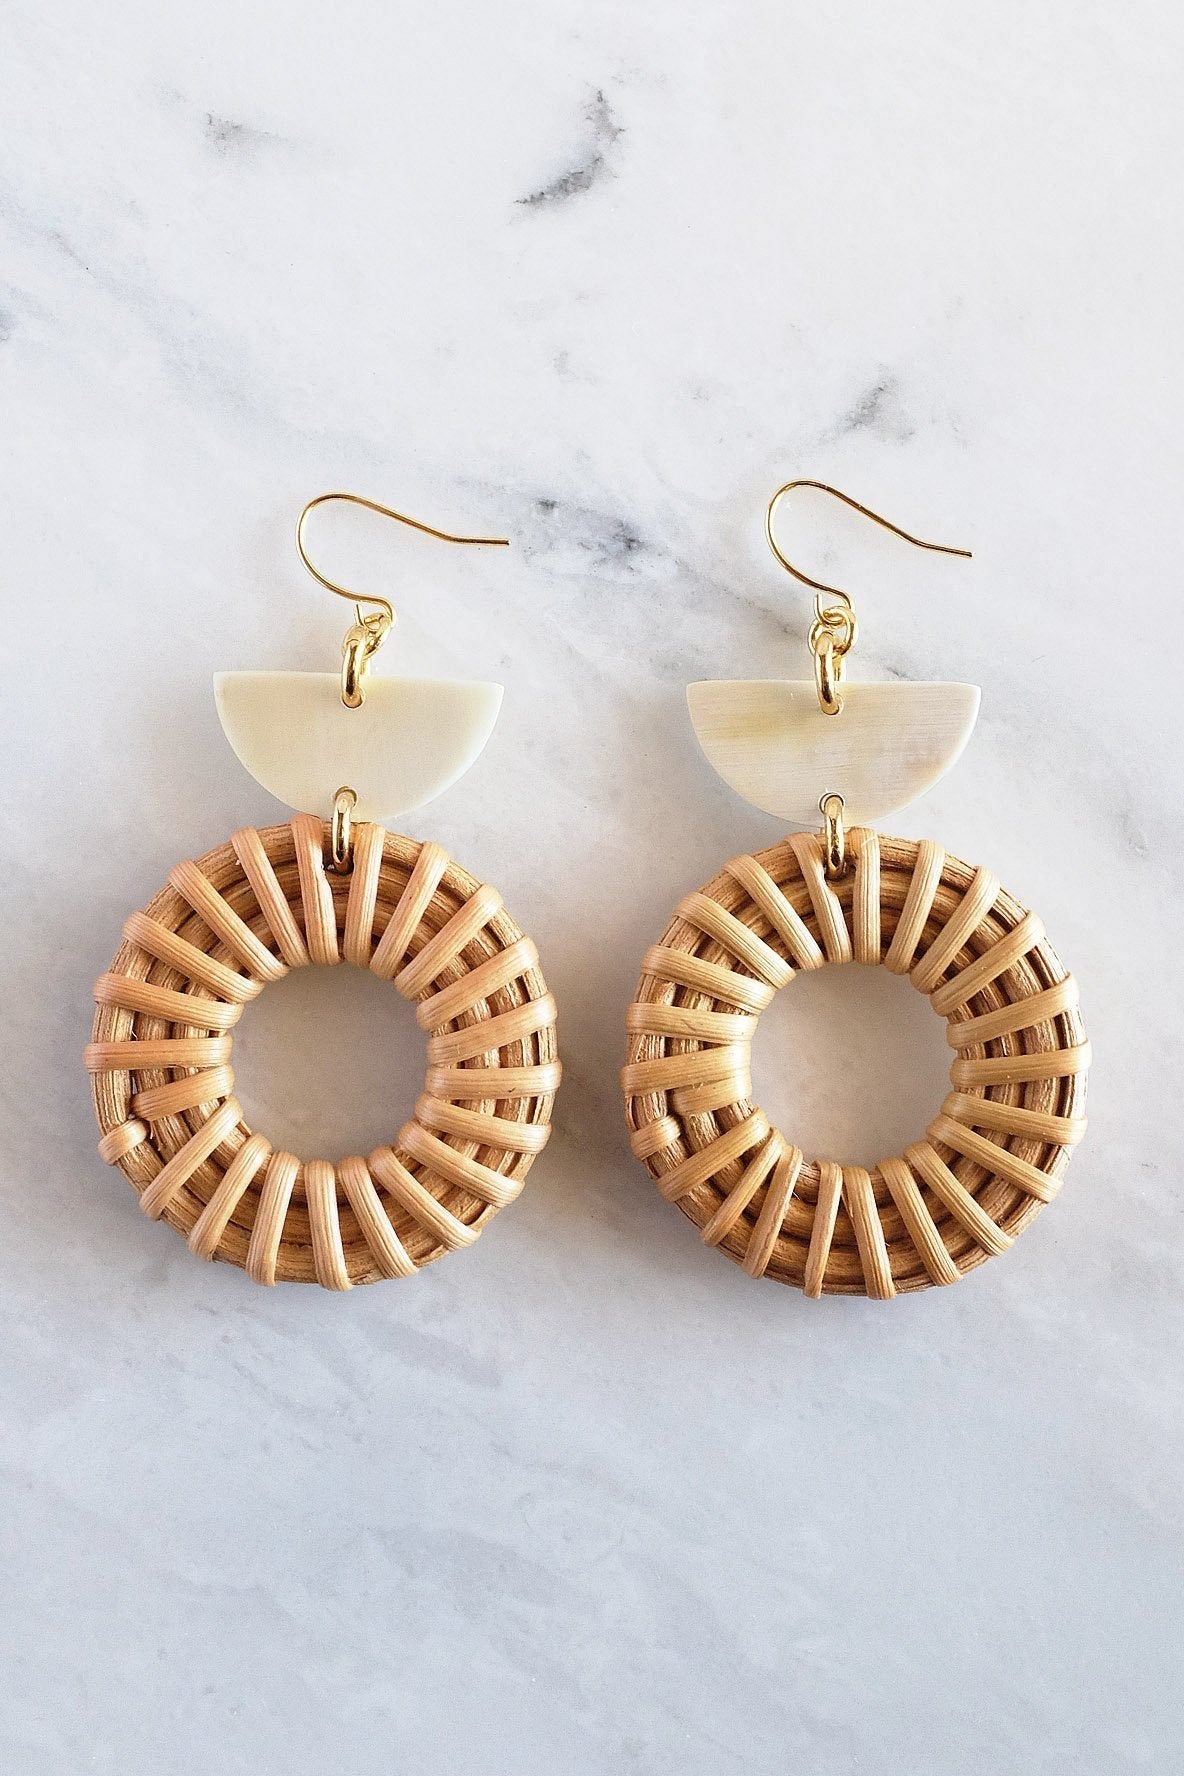 Ninh Binh 16K Gold Plated Brass Horn & Rattan (Straw/Wicker) Crescent & Donut Earringscategory_Accessories from Hathorway - SHOPELEOS